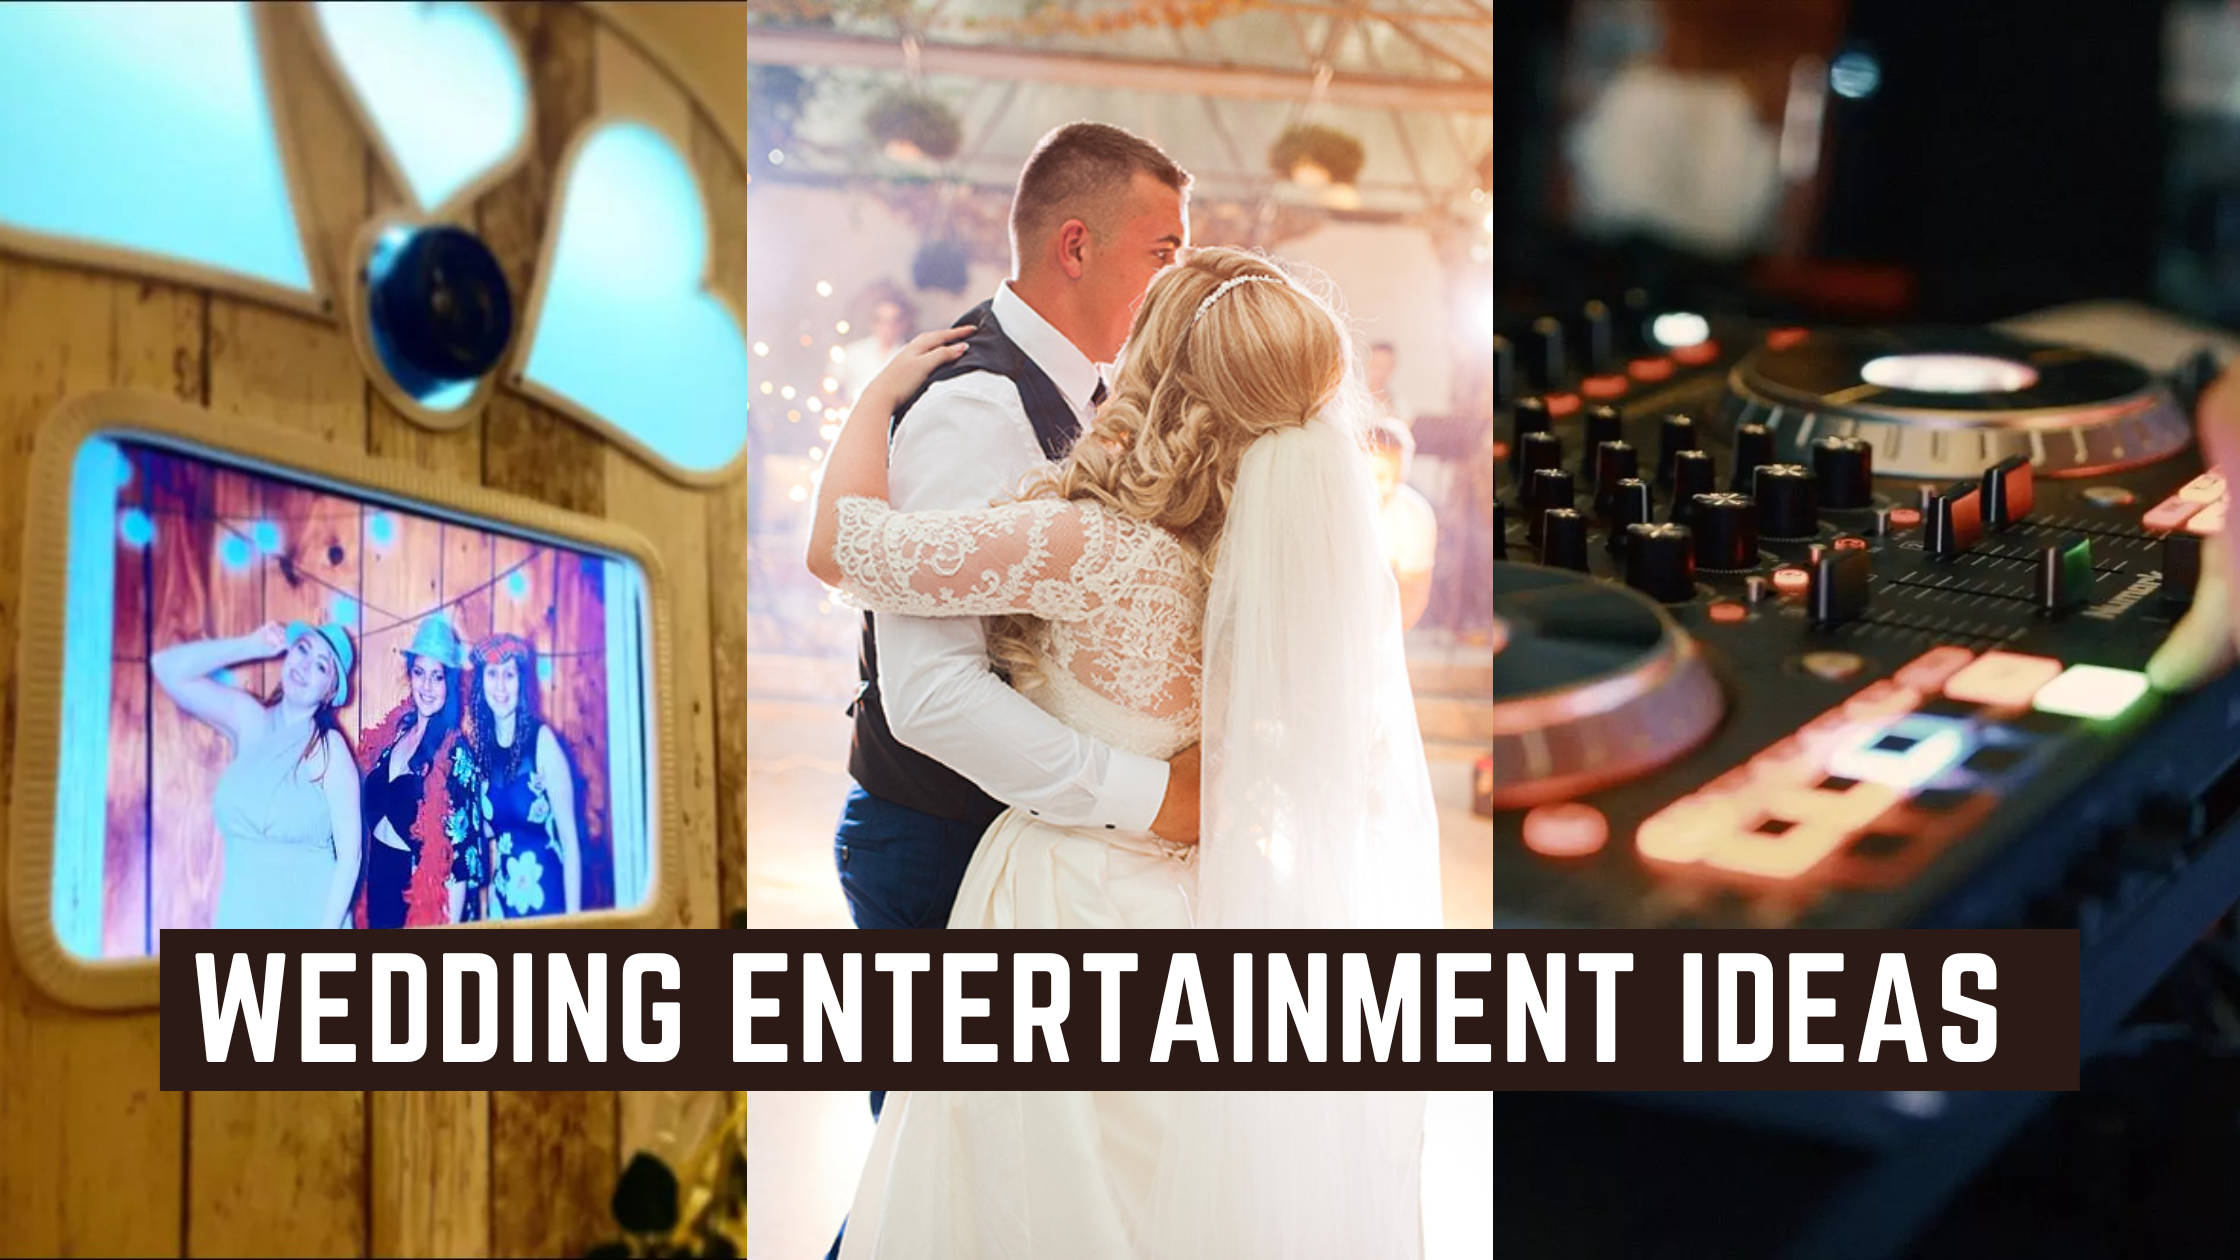 Top Wedding Entertainment Ideas for your Big Day